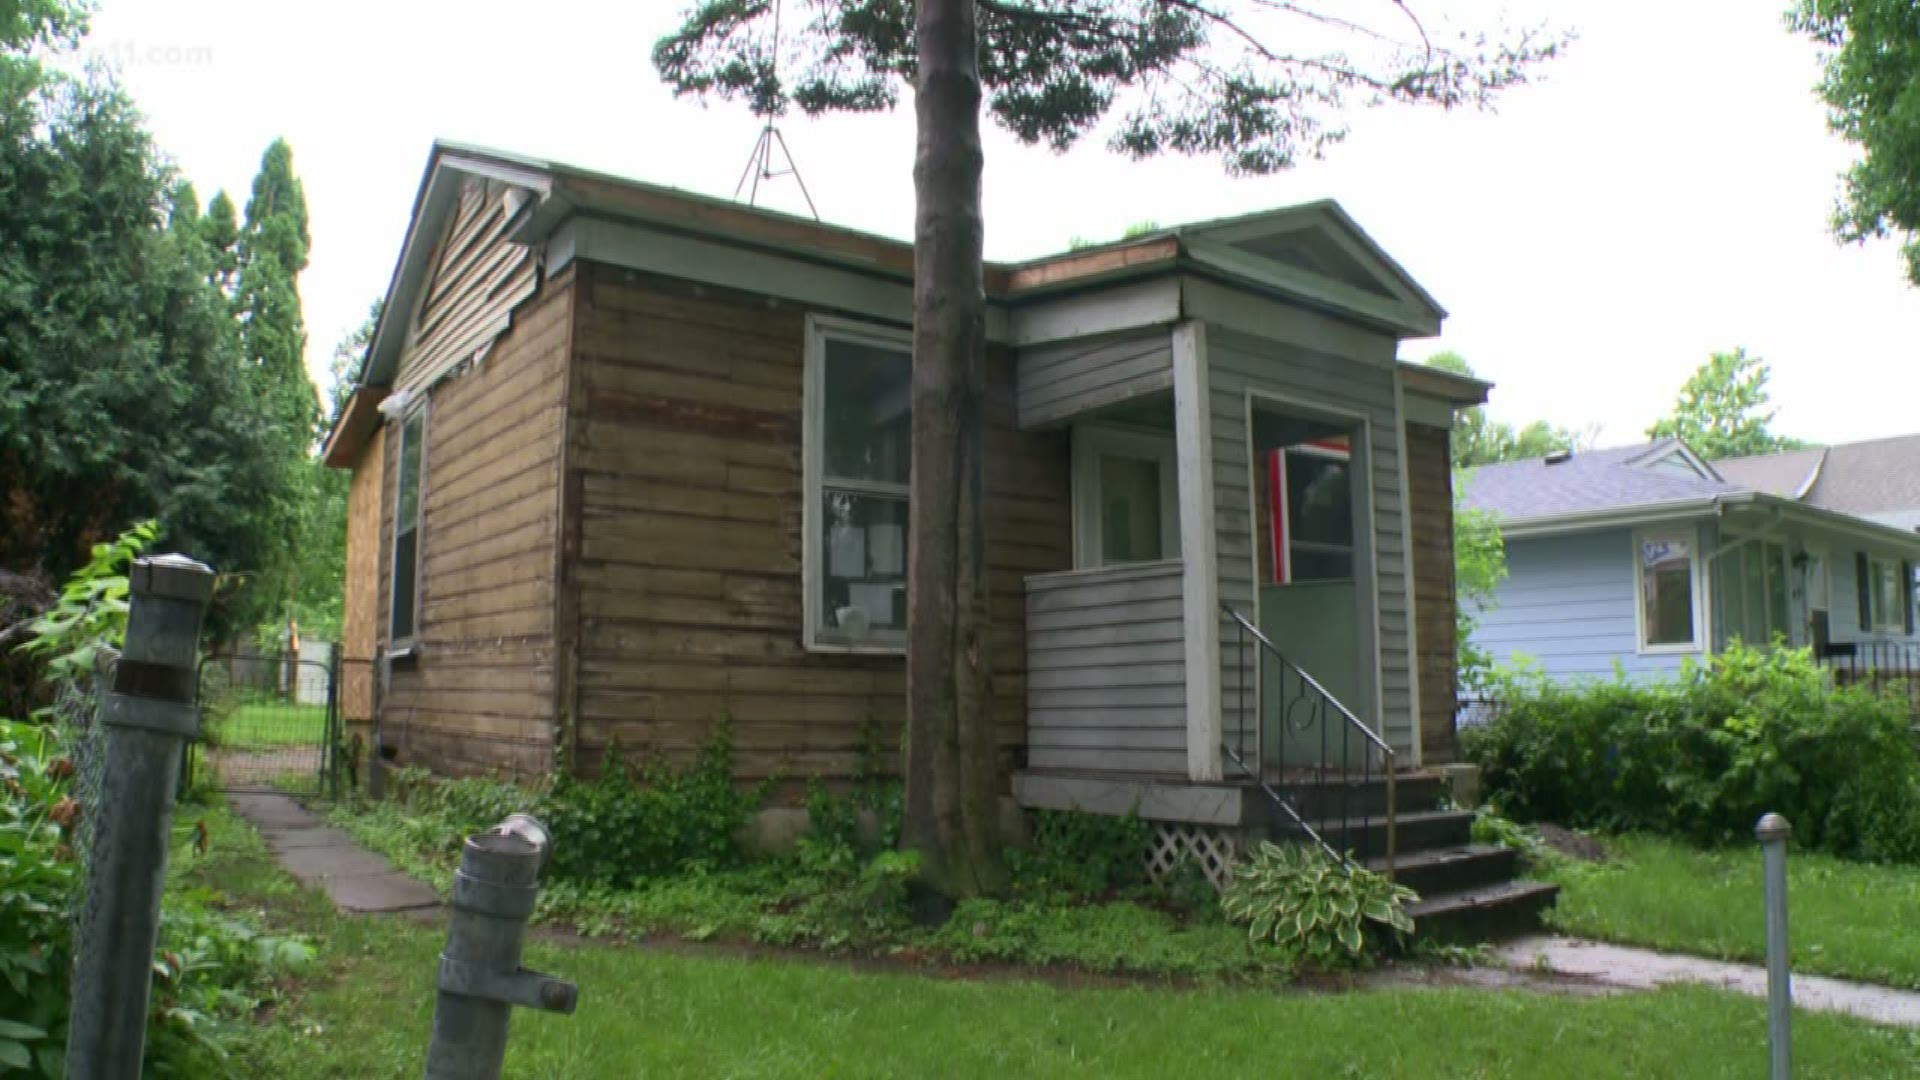 A neighborhood fundraiser is set for June 21 to try and raise funds needed to rehabilitate the John Lewis Home, built in 1856. https://kare11.tv/2tbD5Hk